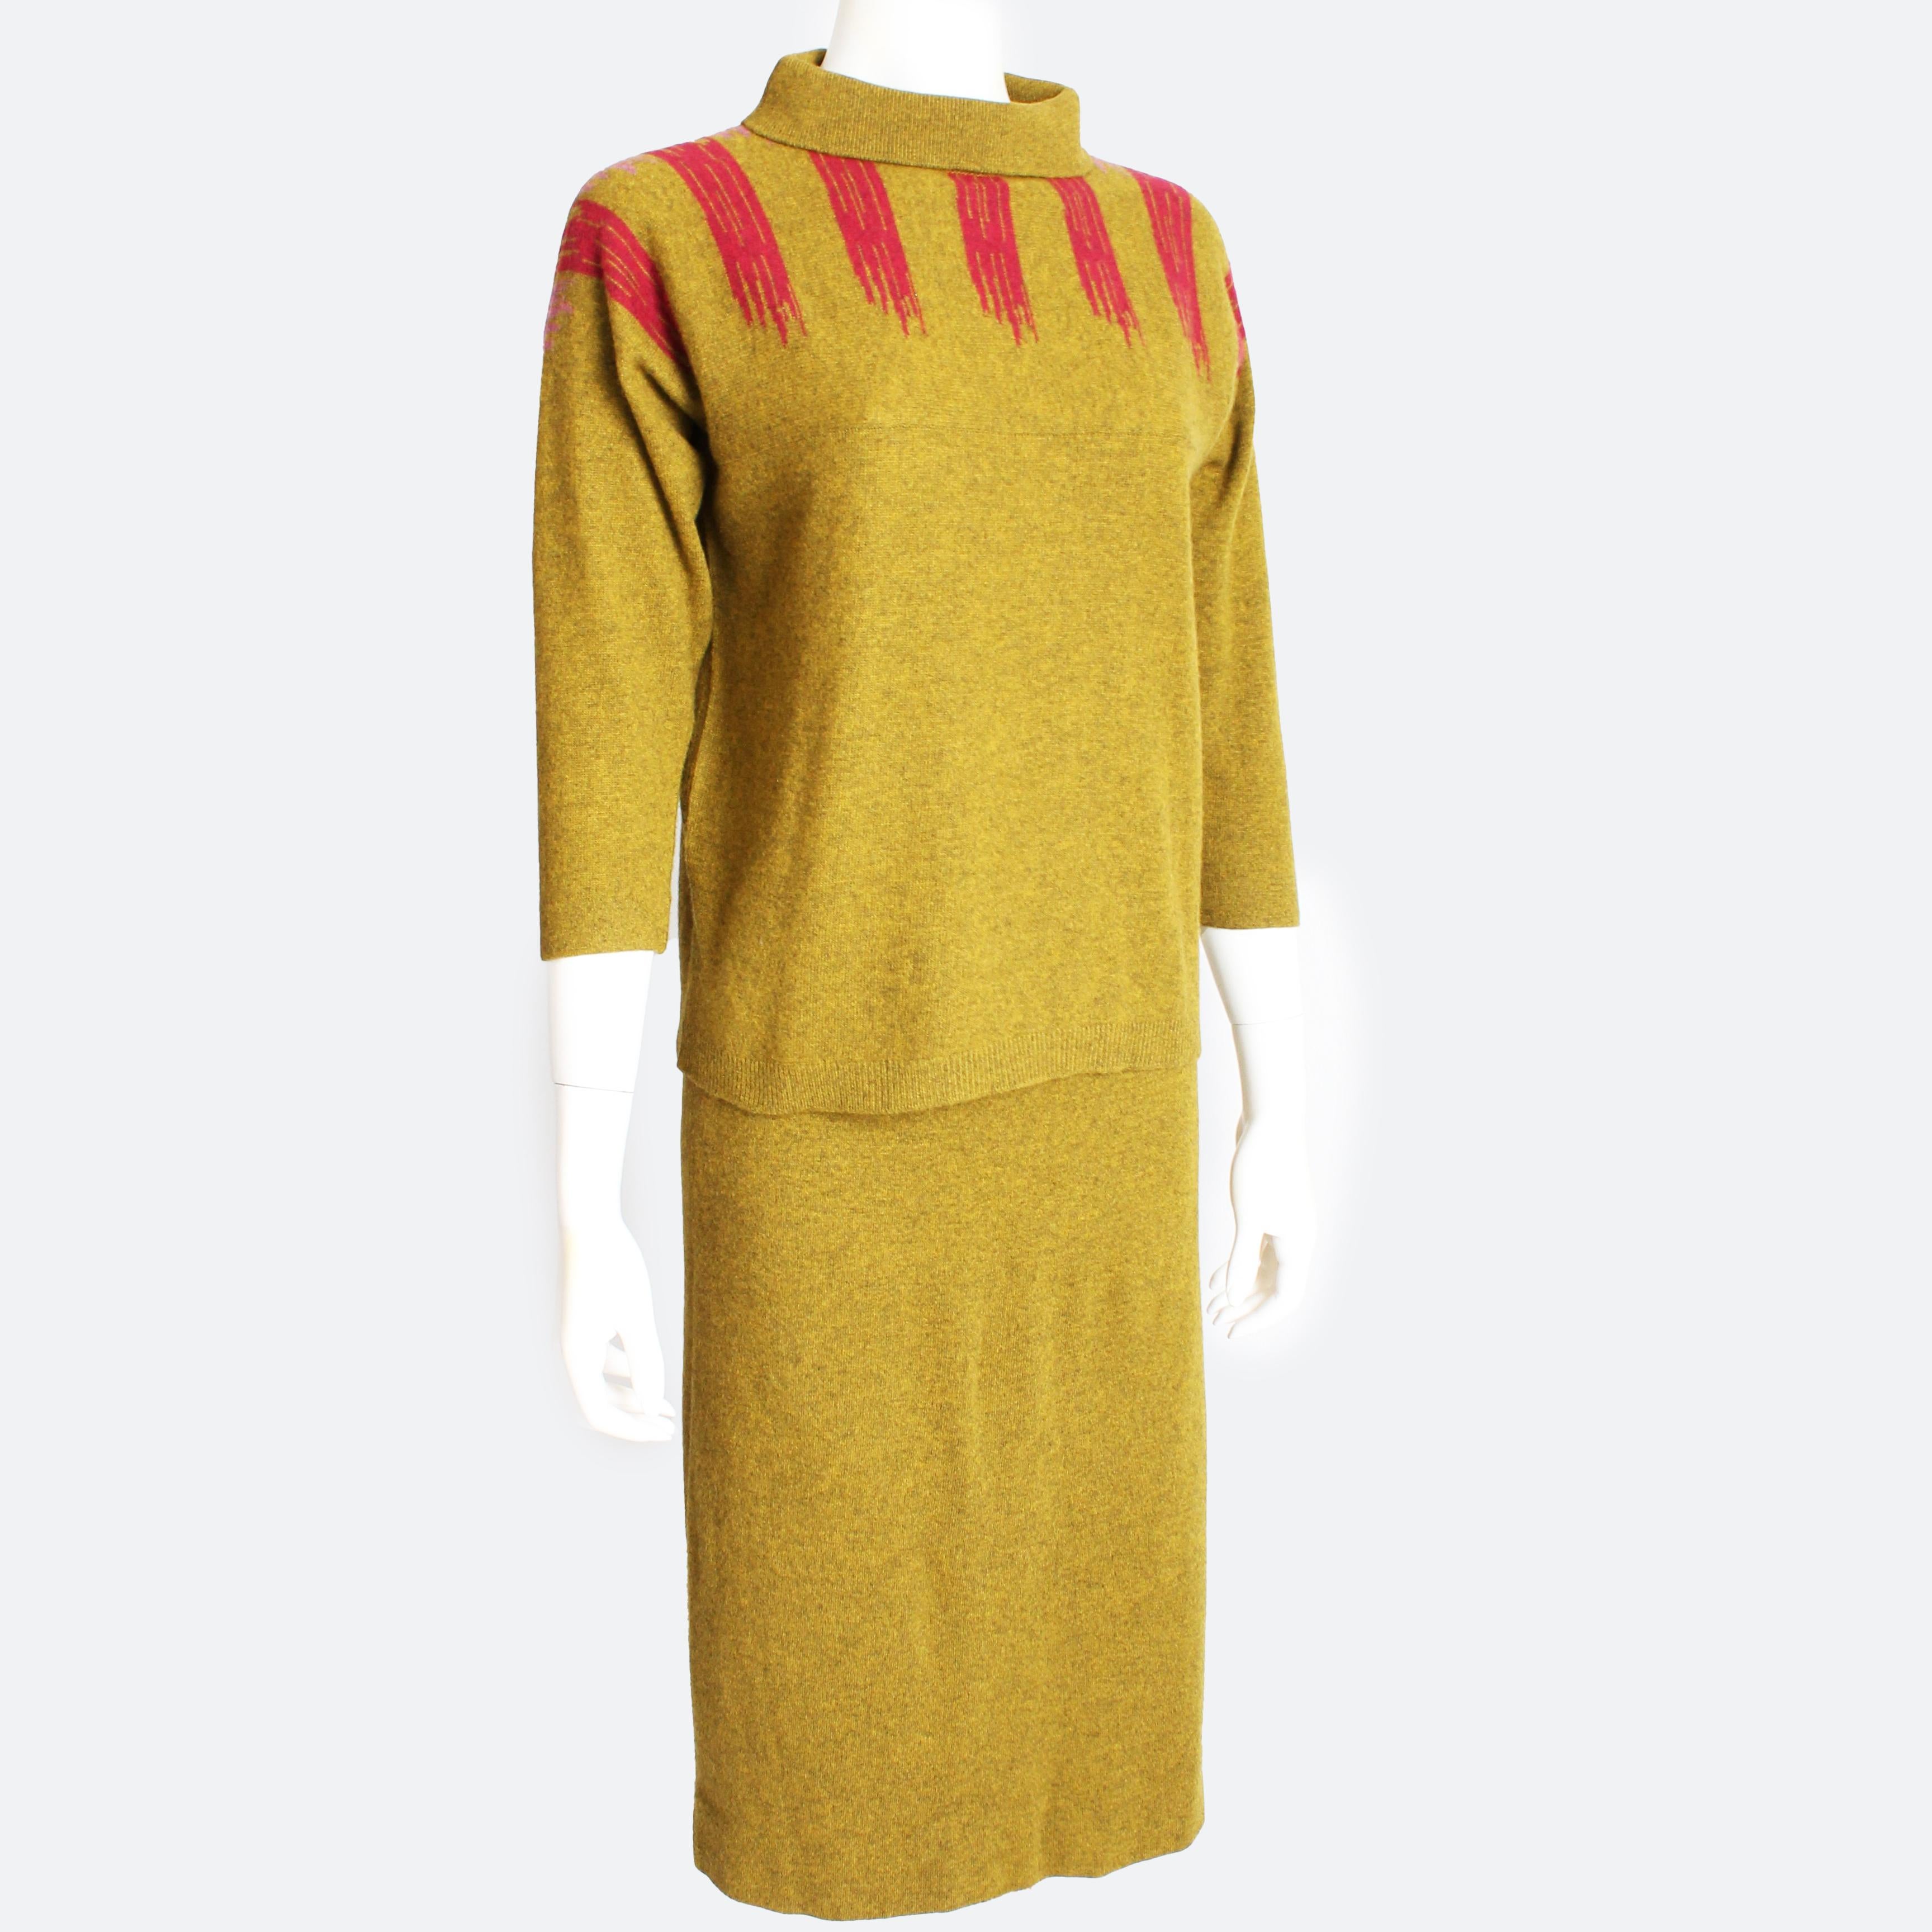 This incredible two-piece ensemble was designed by the most significant American designer of our time, Bonnie Cashin. Made from an incredibly supple mustard cashmere knit, it features an abstract intarsia design in raspberry on the front and in